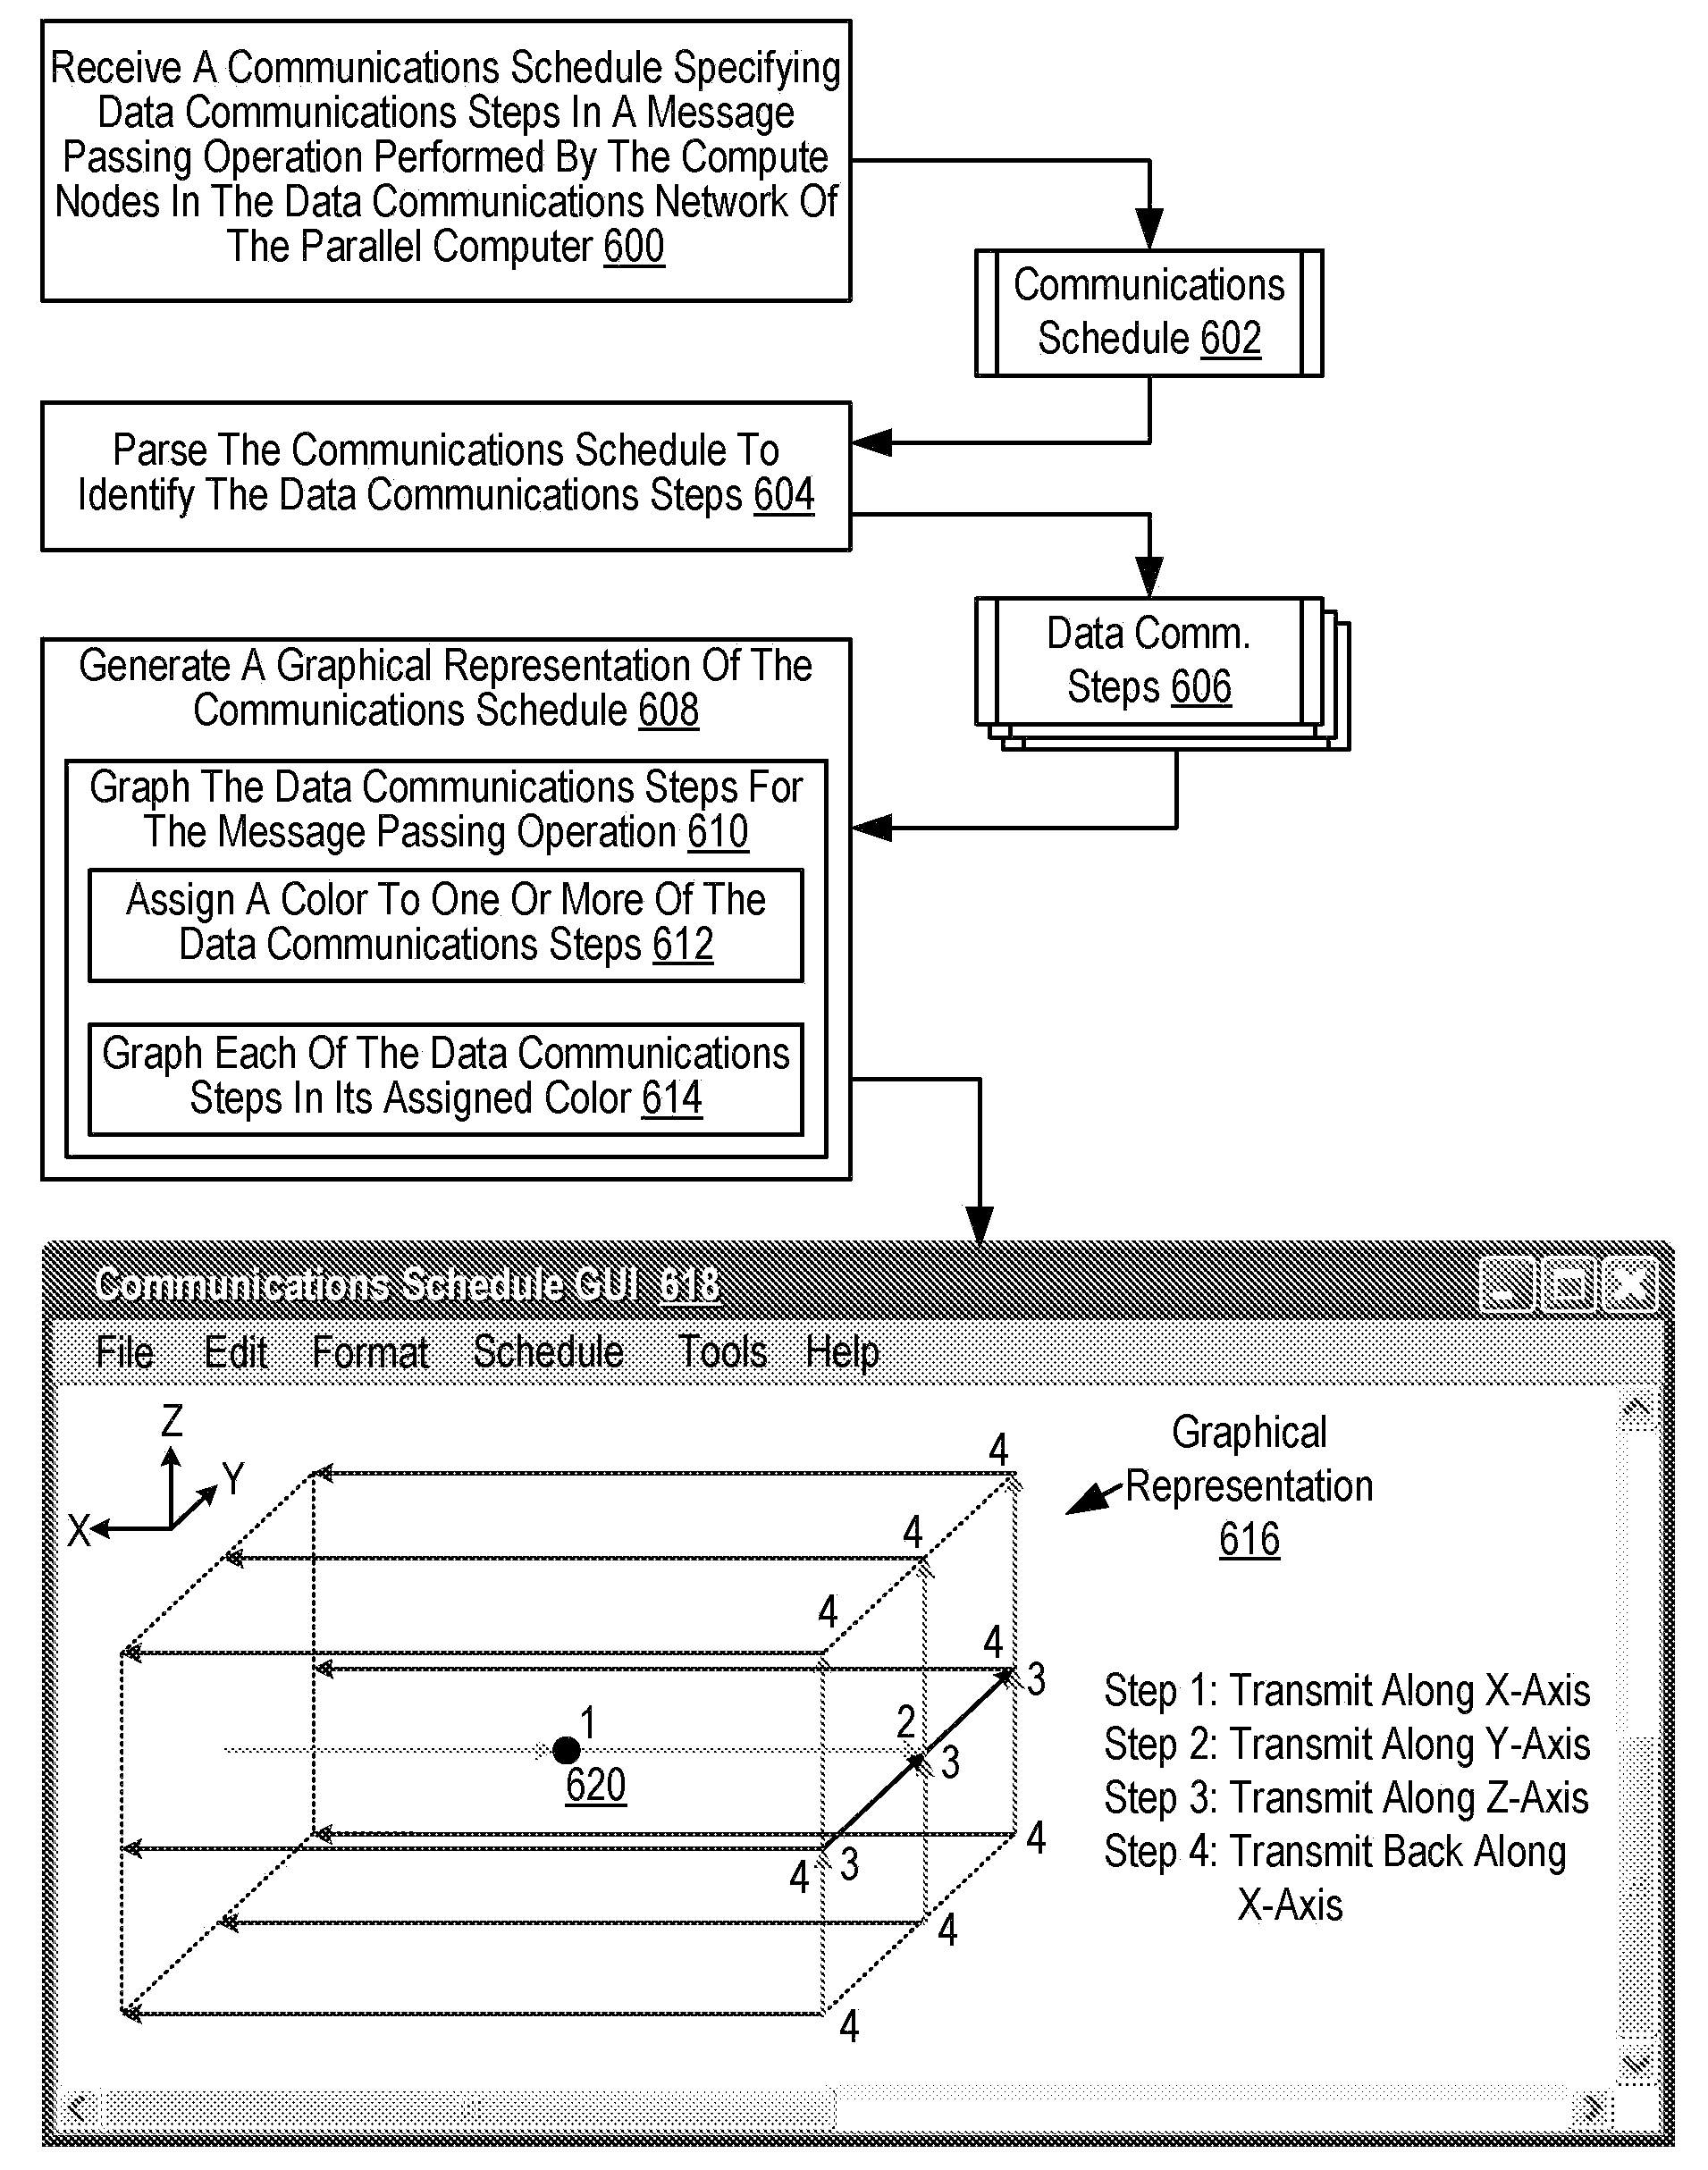 Administering Communications Schedules for Data Communications Among Compute Nodes in a Data Communications Network of a Parallel Computer